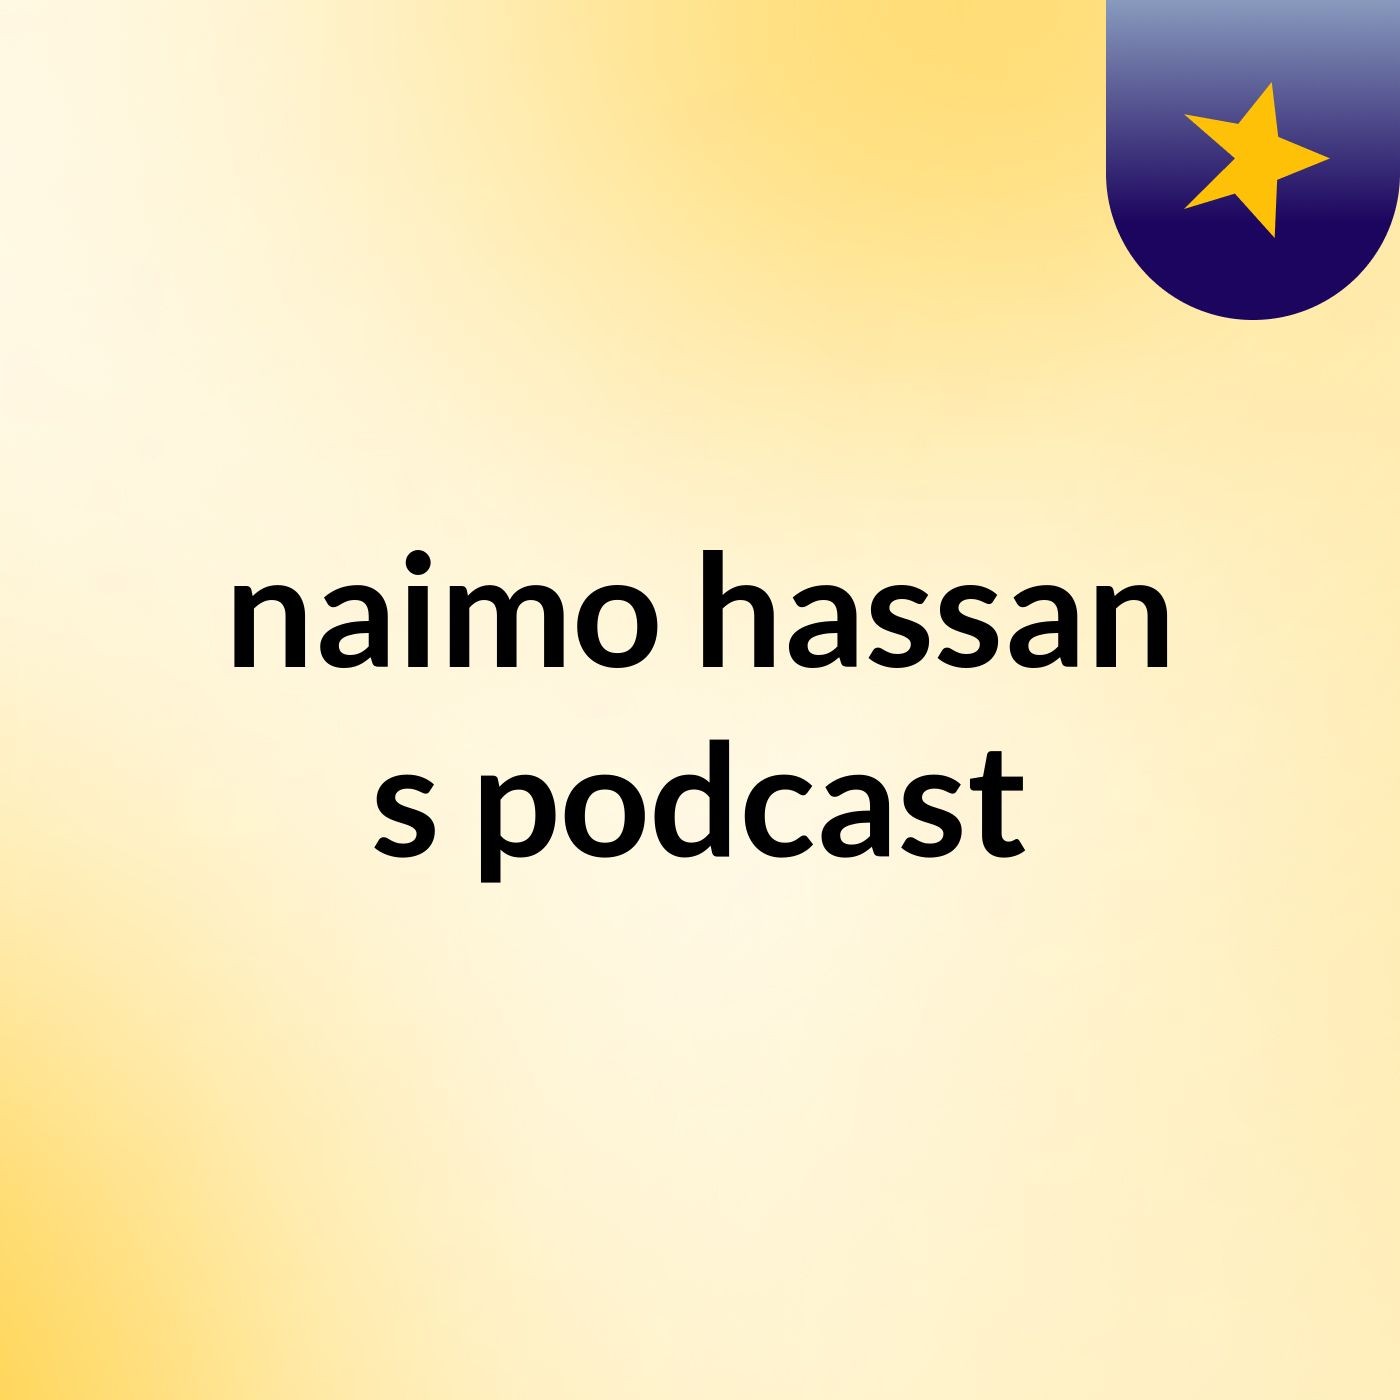 Episode 3 - naimo hassan's podcast